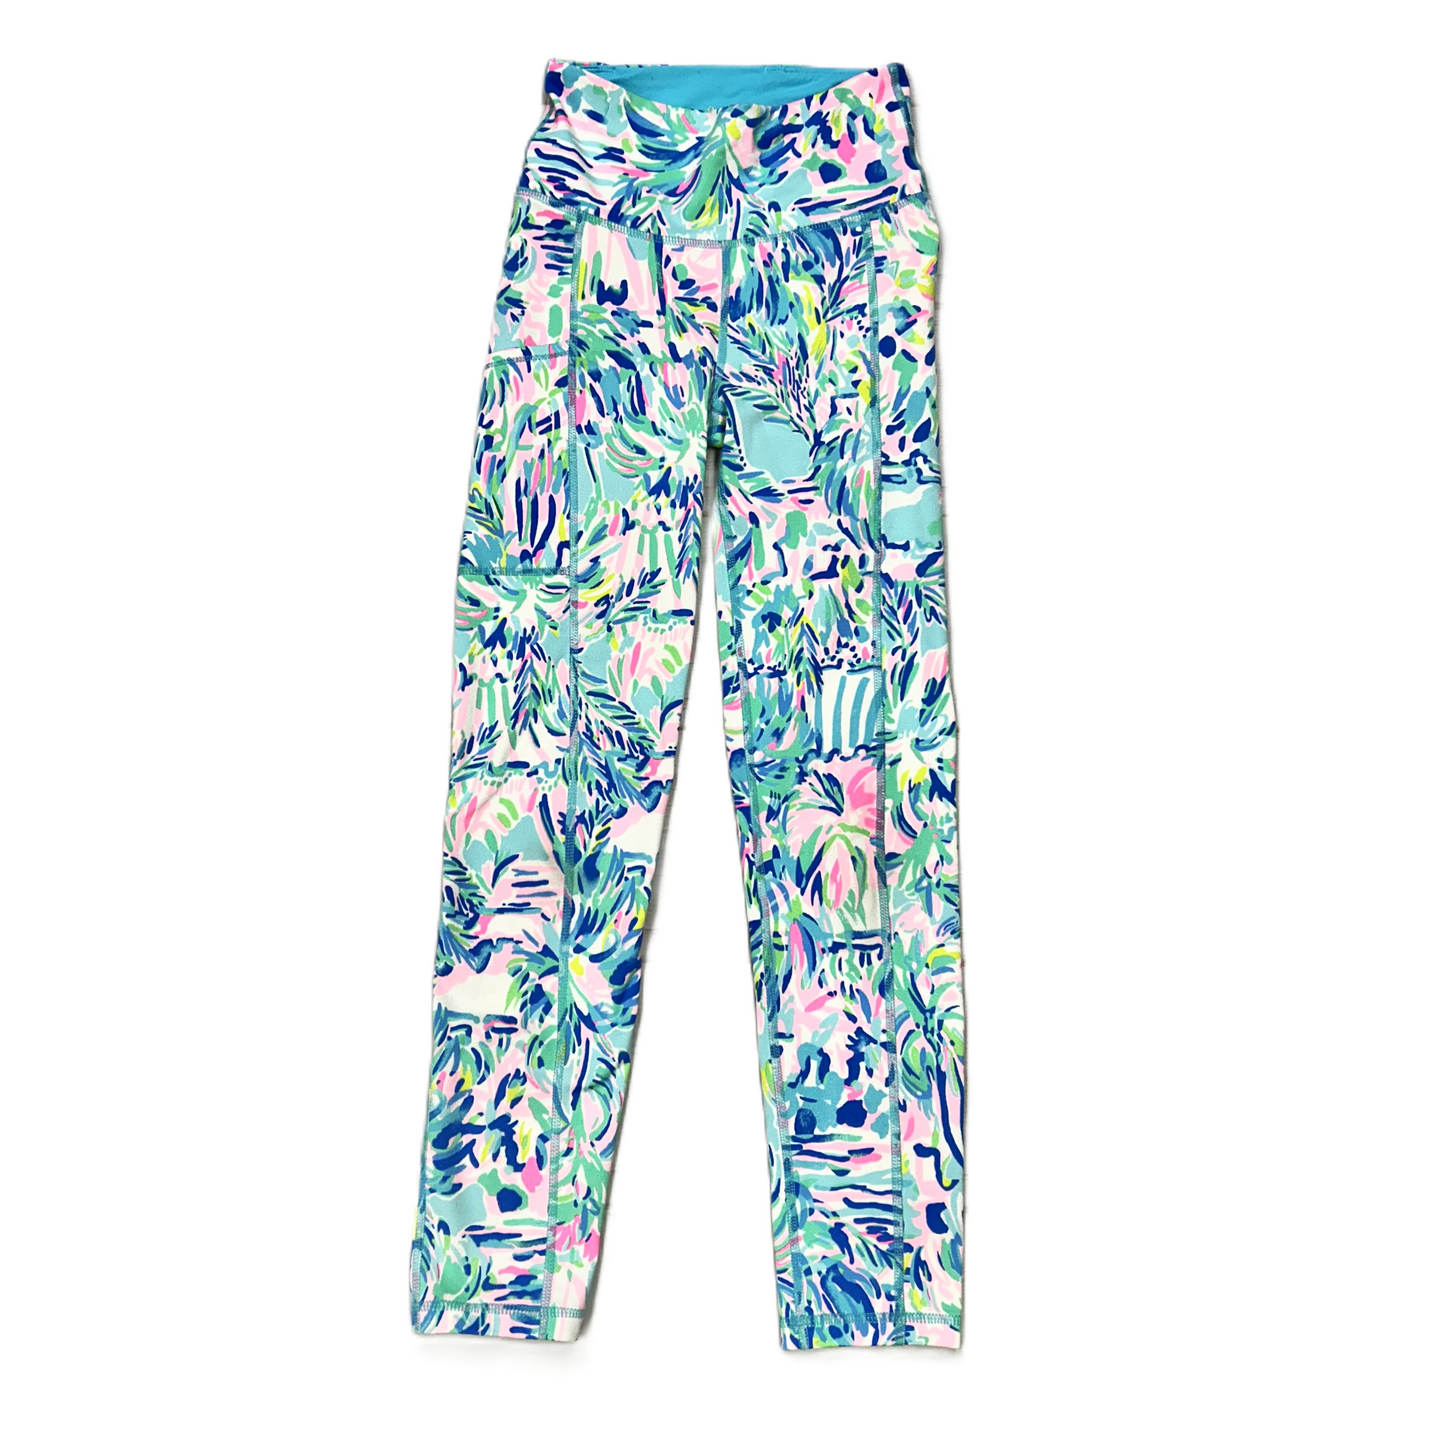 Blue & Pink Pants Designer By Lilly Pulitzer, Size: Xxs